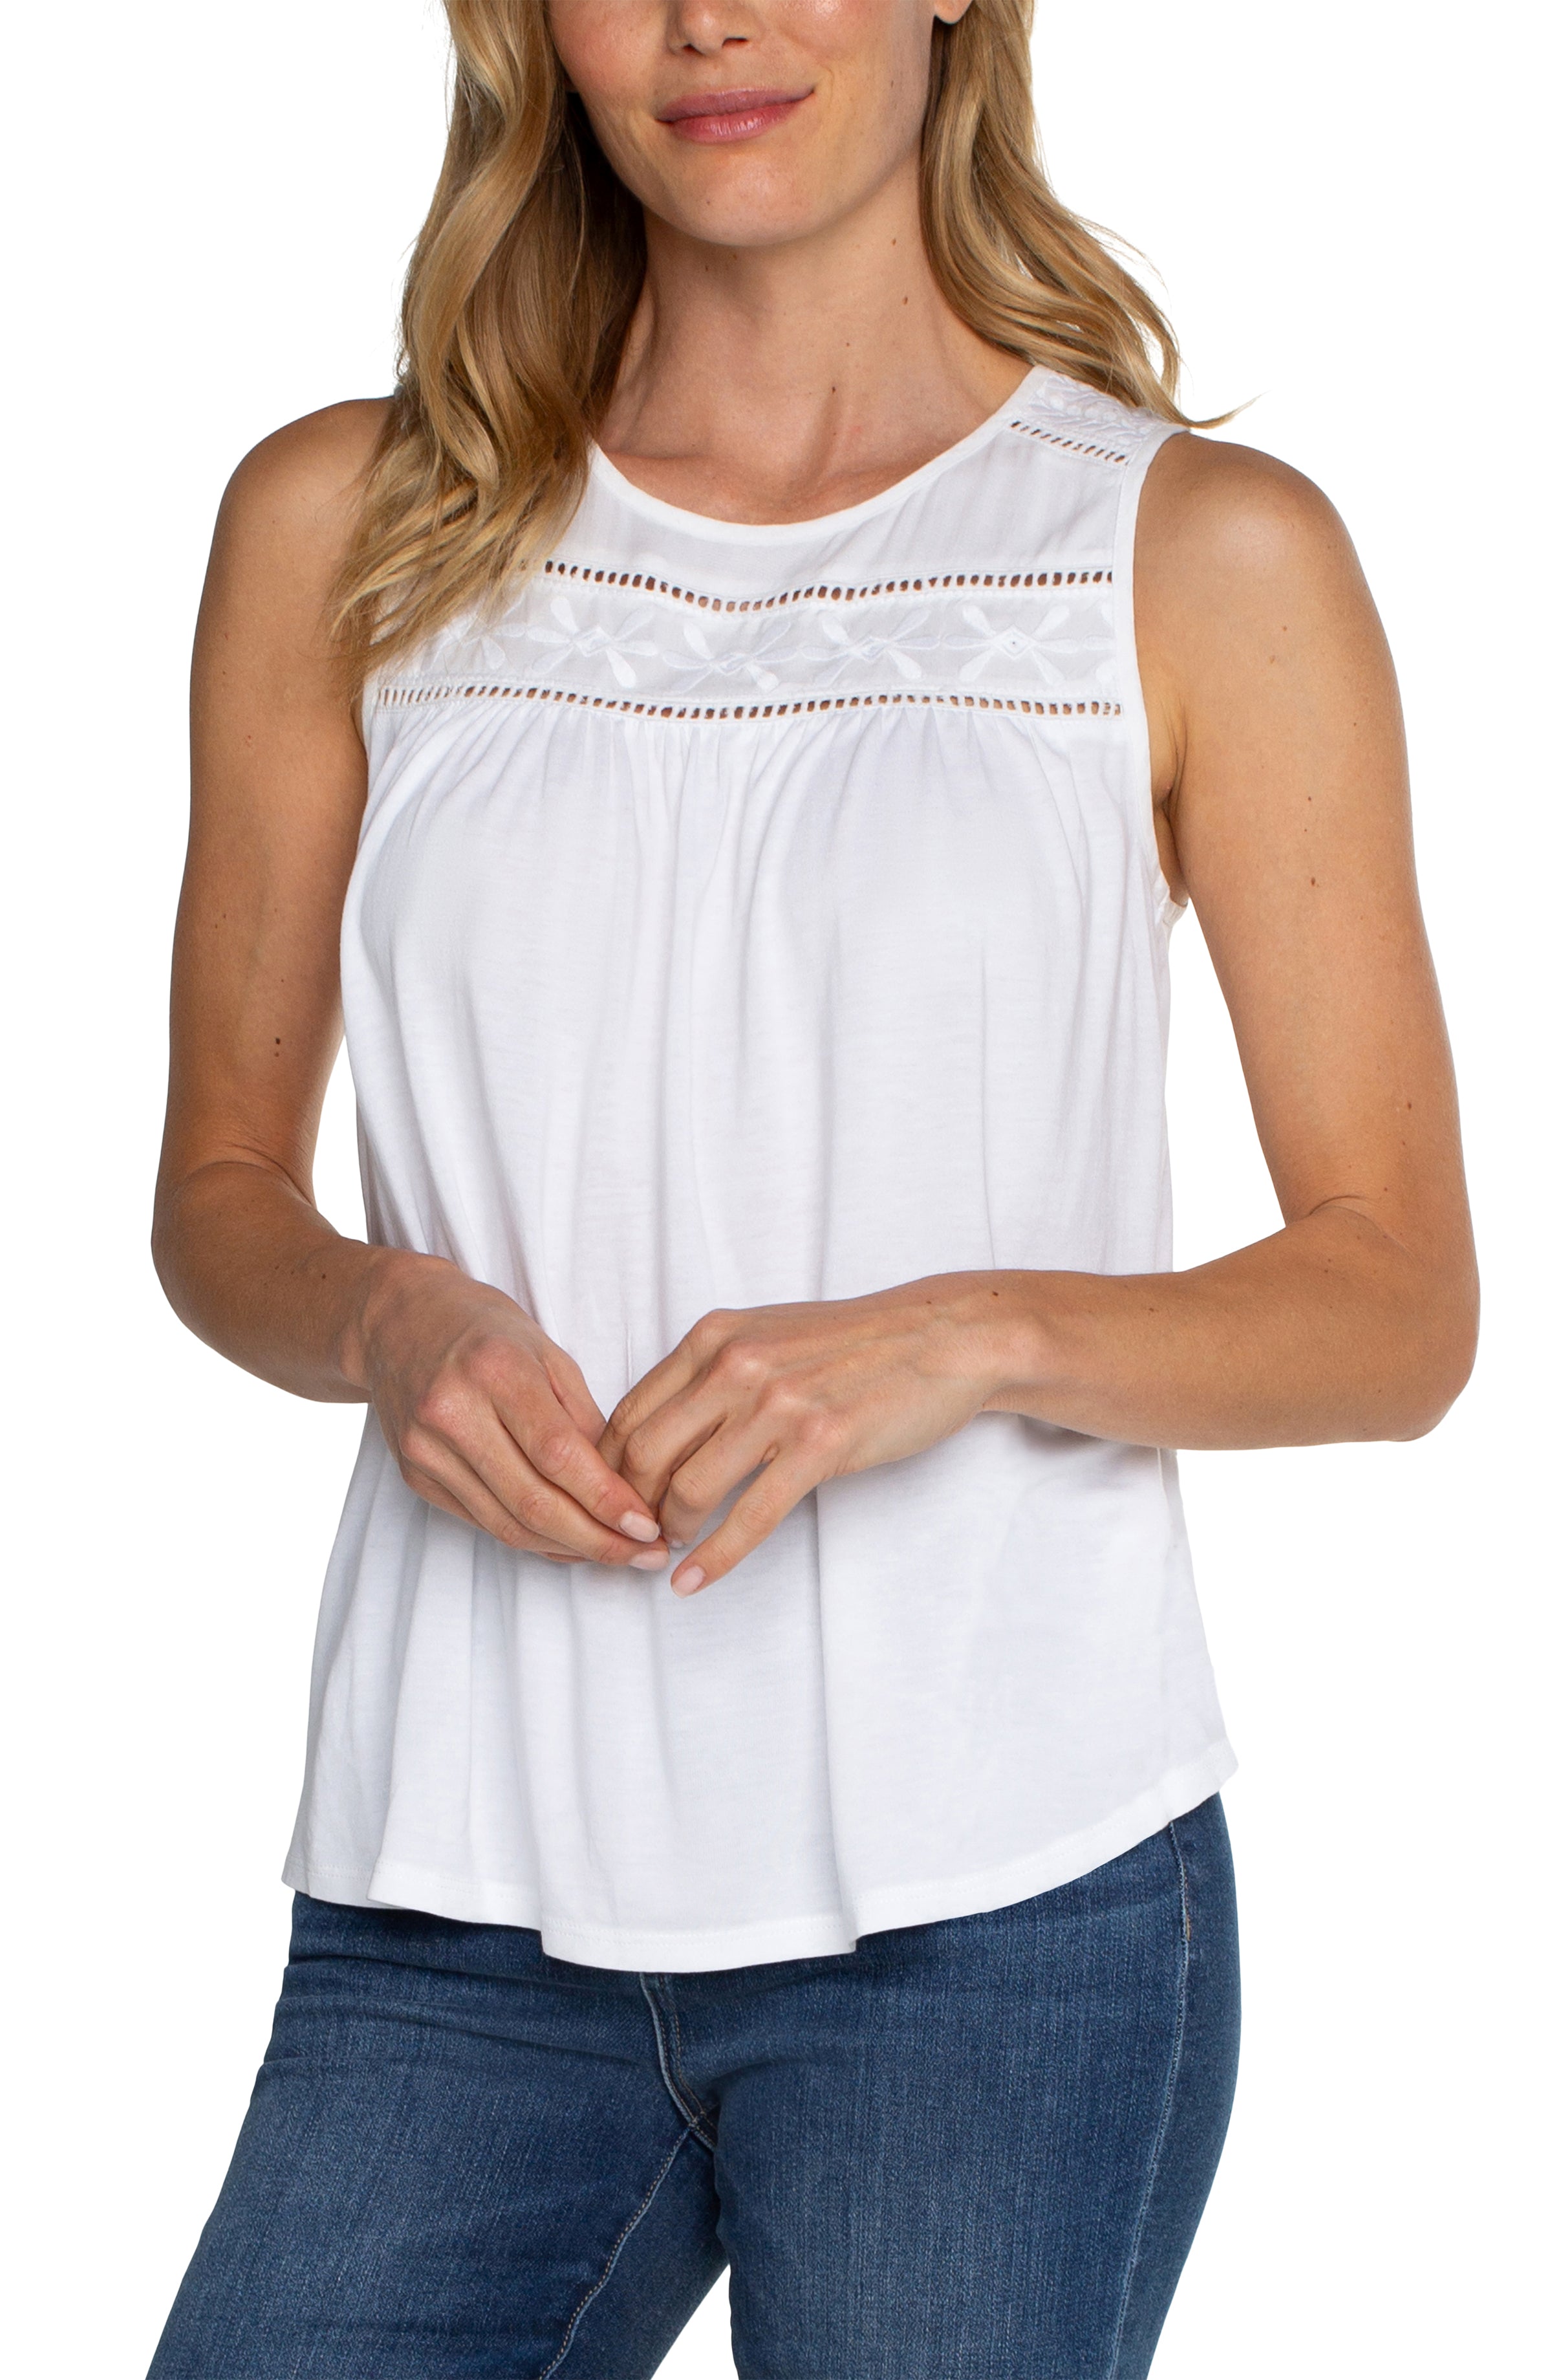 LPLA Embroidered Muscle Tank